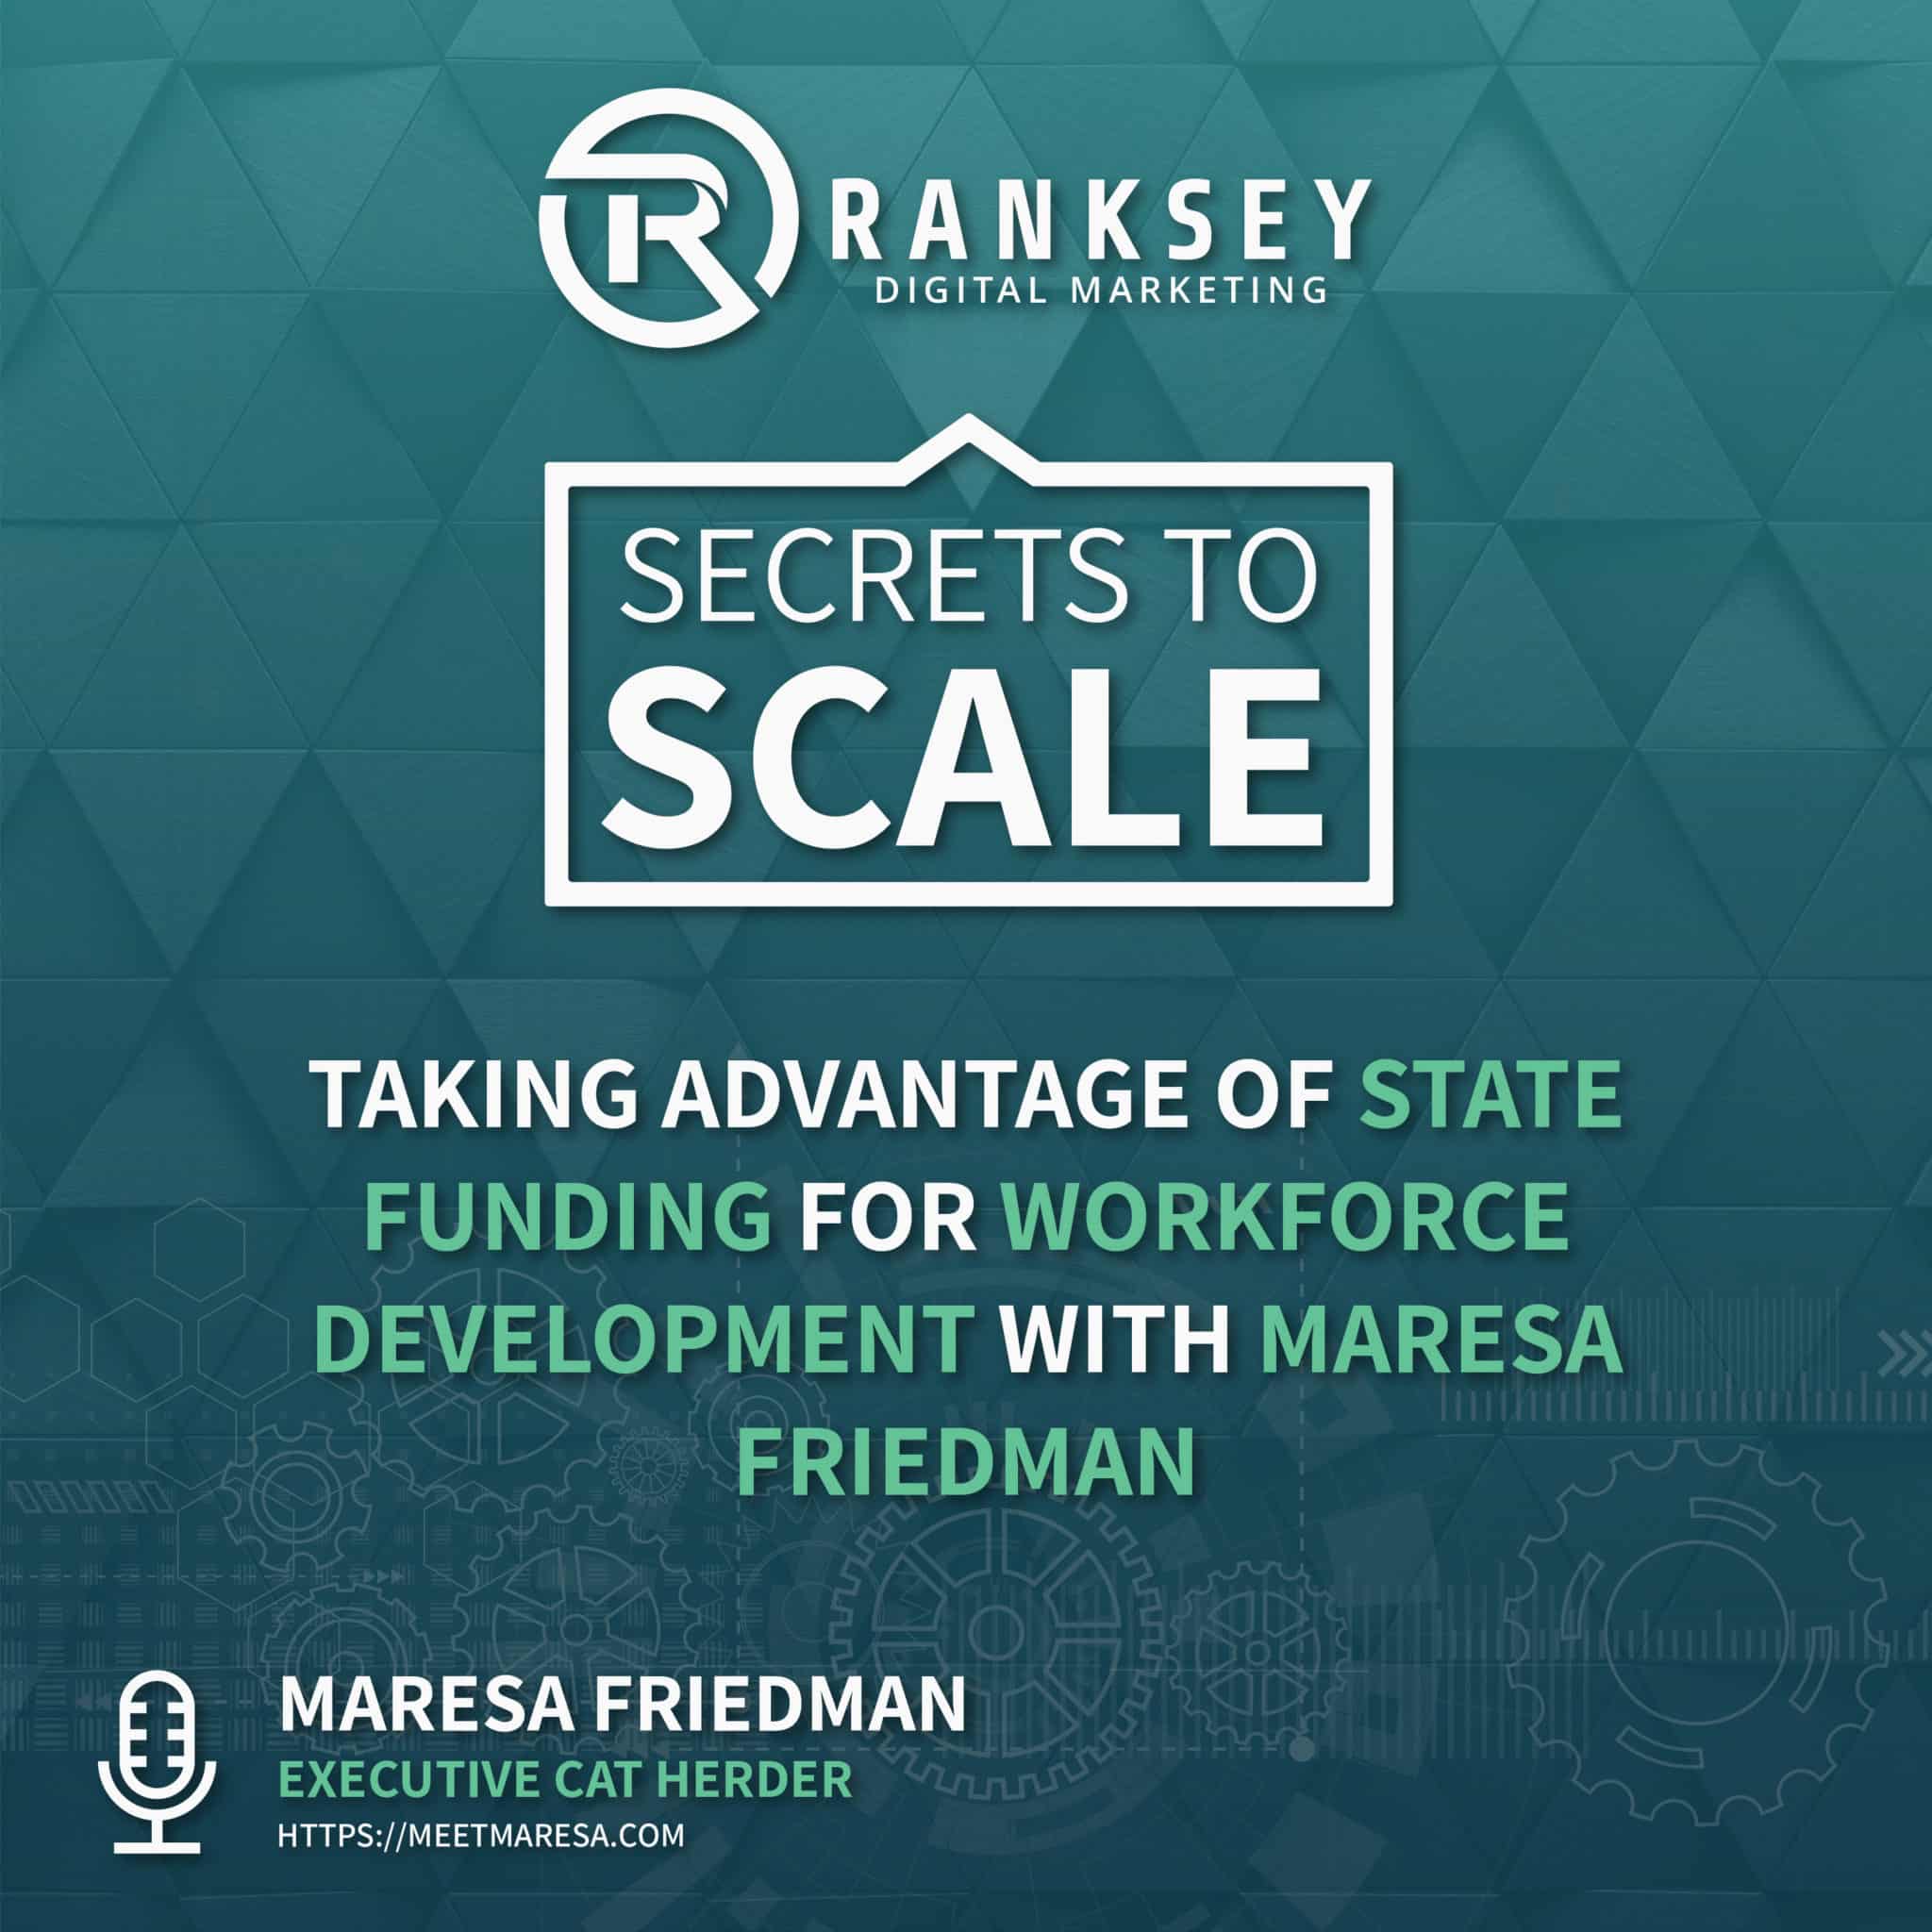 021 - Taking Advantage of State Funding For Workforce Development with Maresa Friedman